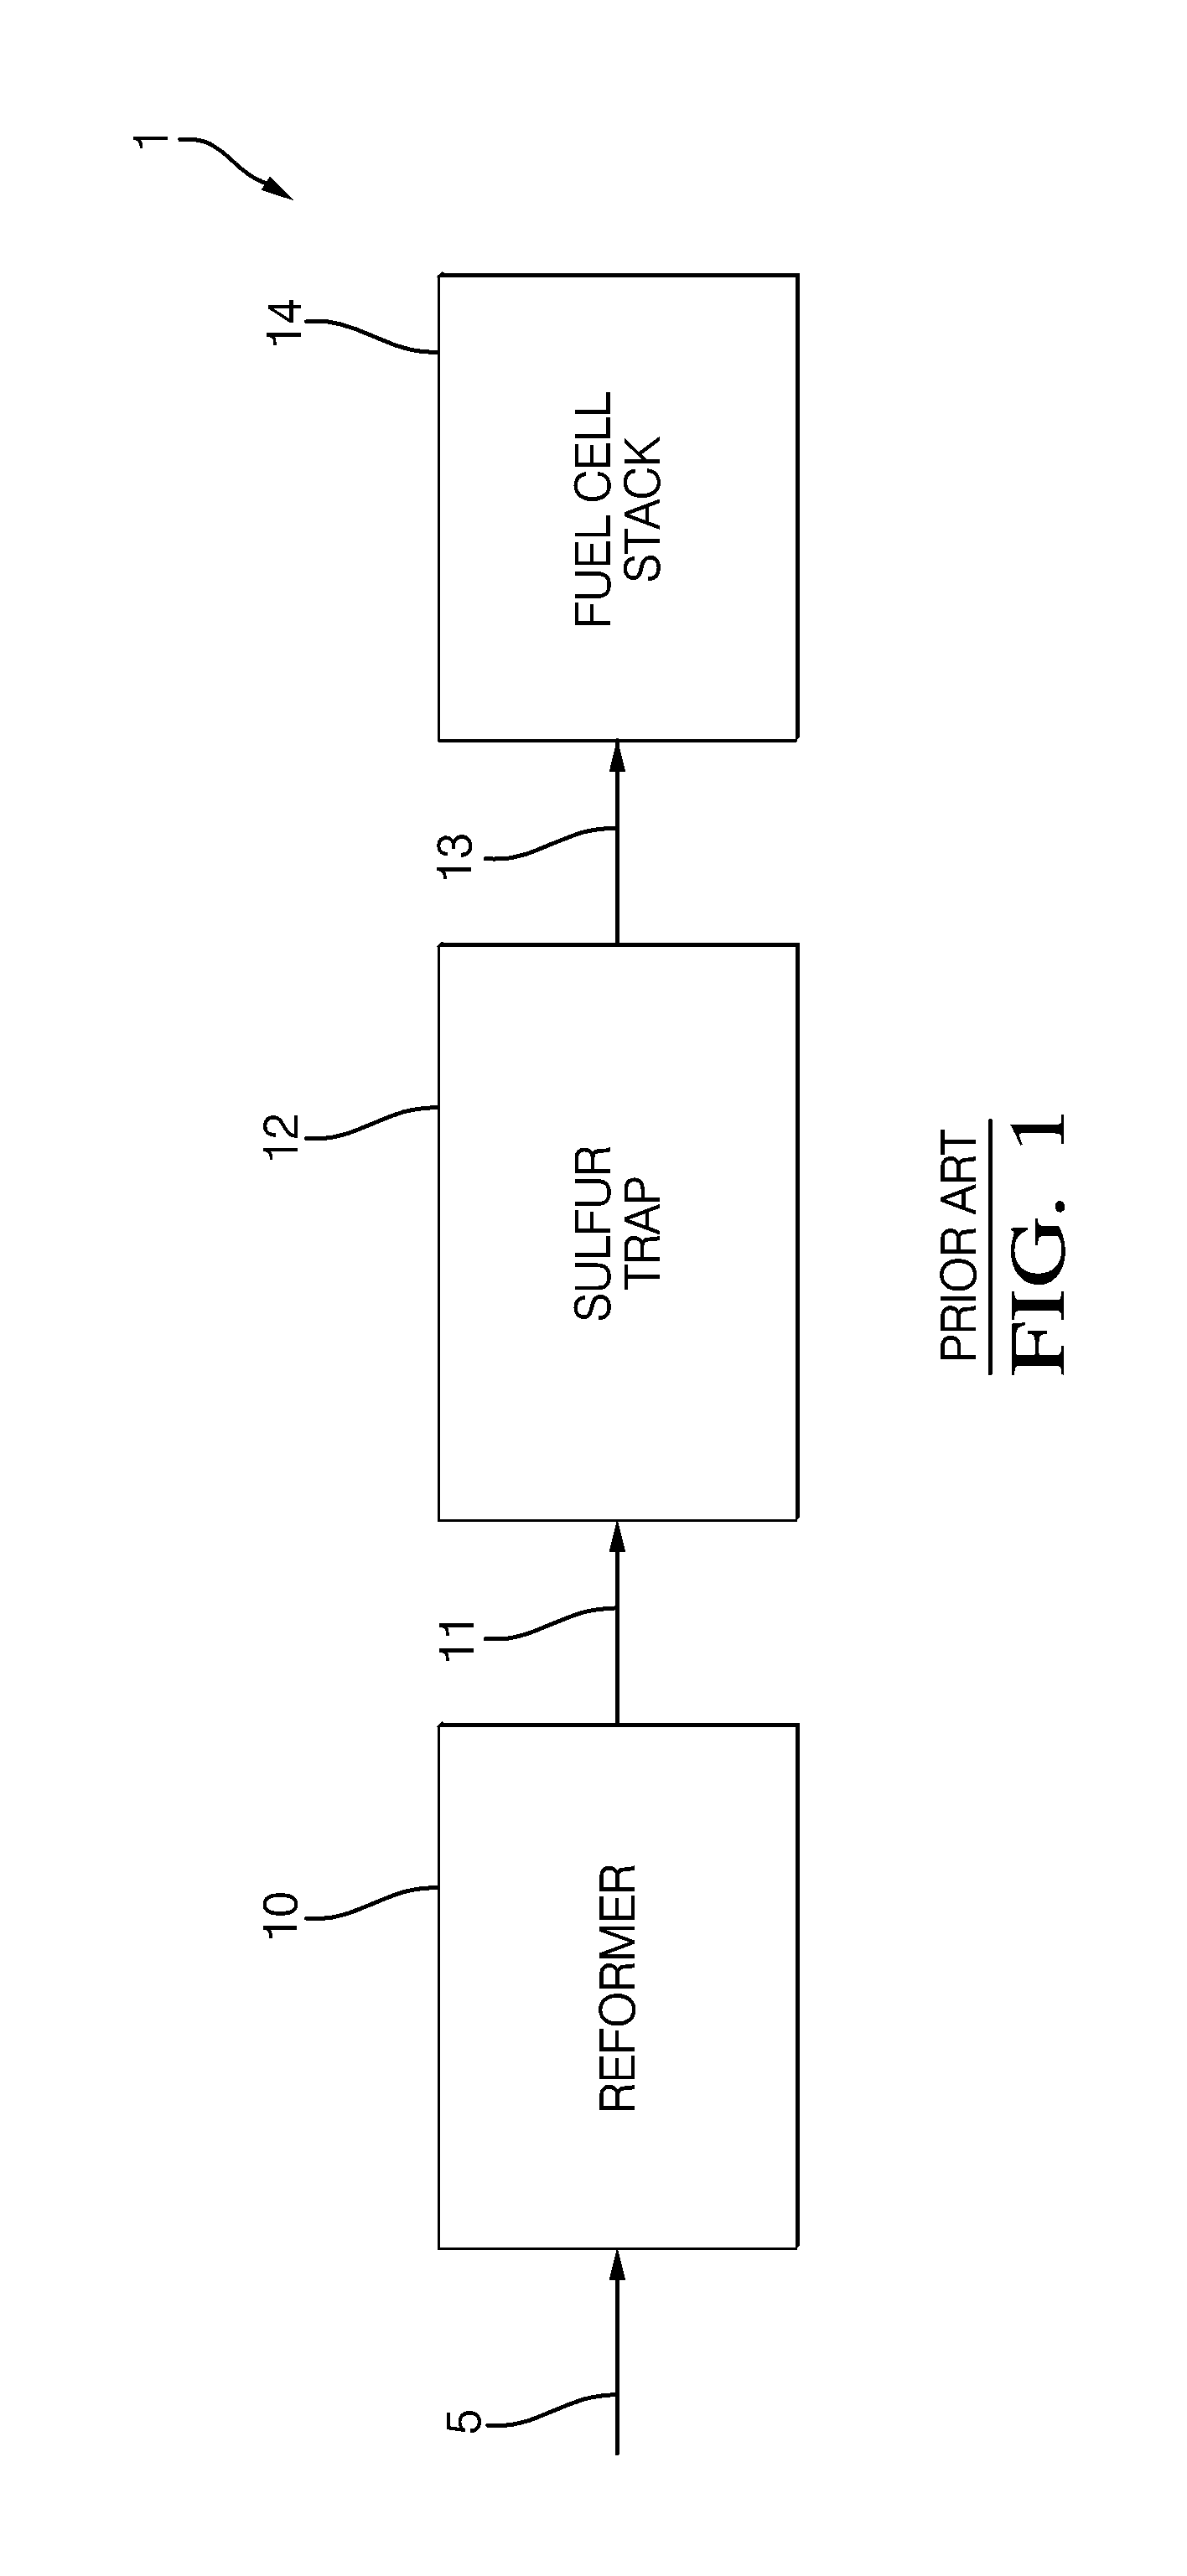 System for Adding Sulfur to a Fuel Cell Stack System for Improved Fuel Cell Stability